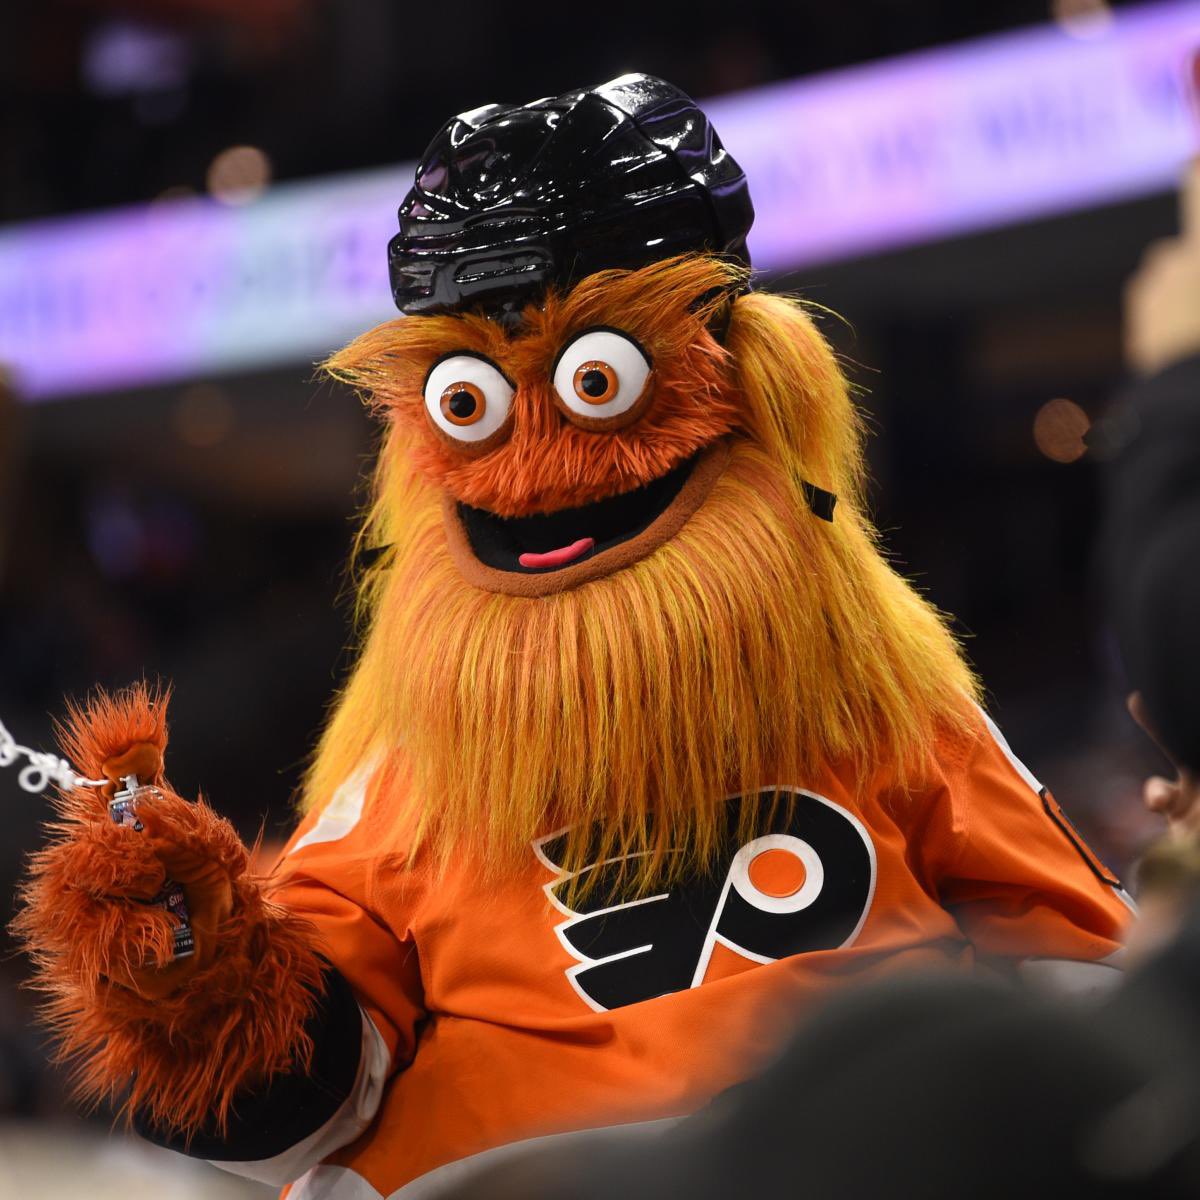 @stach_eric @David_A_Muller Well, I’m sure Gritty is pretty miffed ….